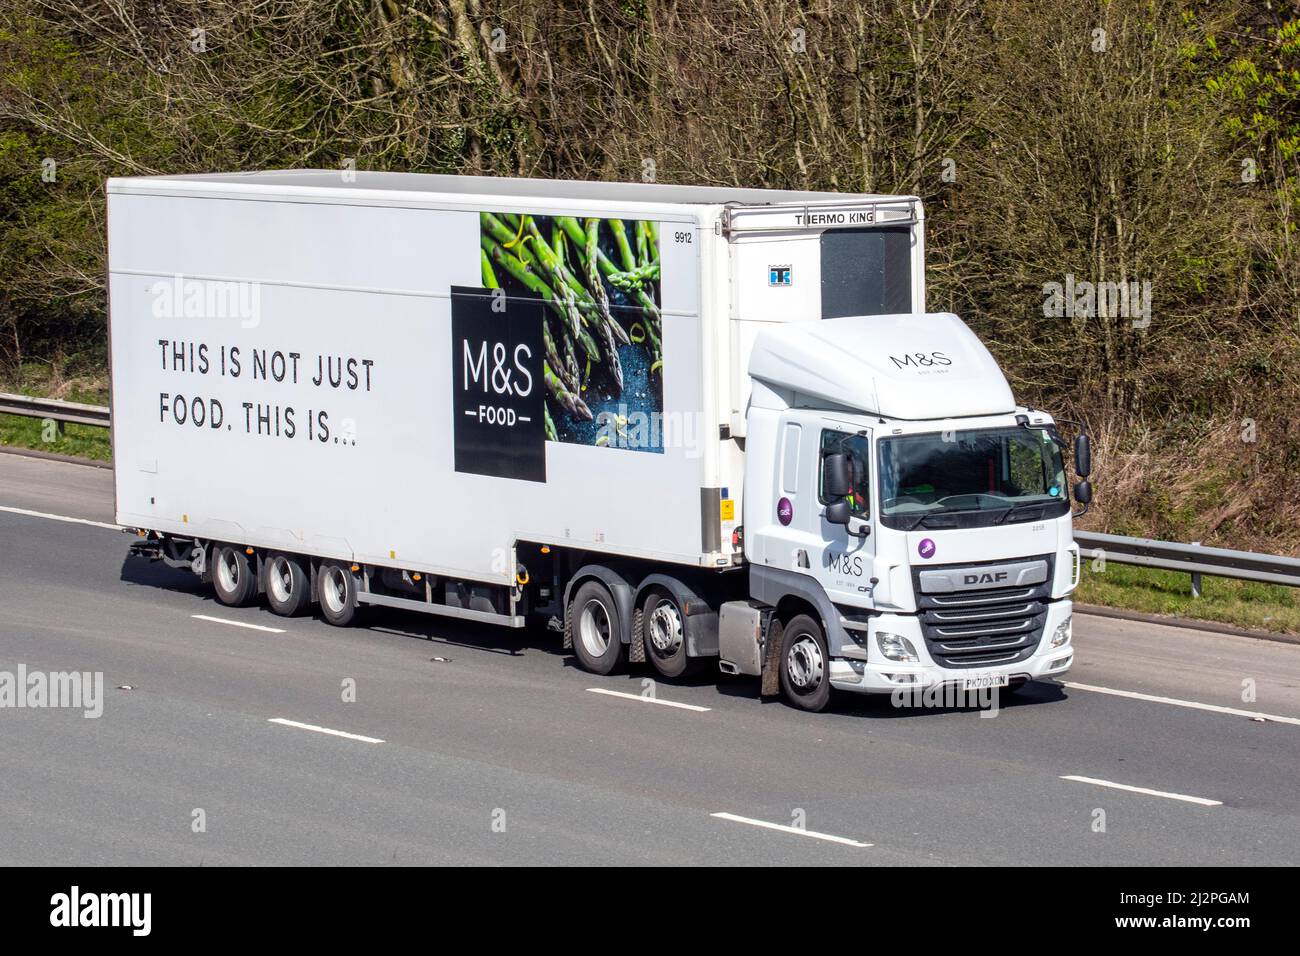 M&S, Marks and Spencer, Marks & Sparks, This is not just food ...